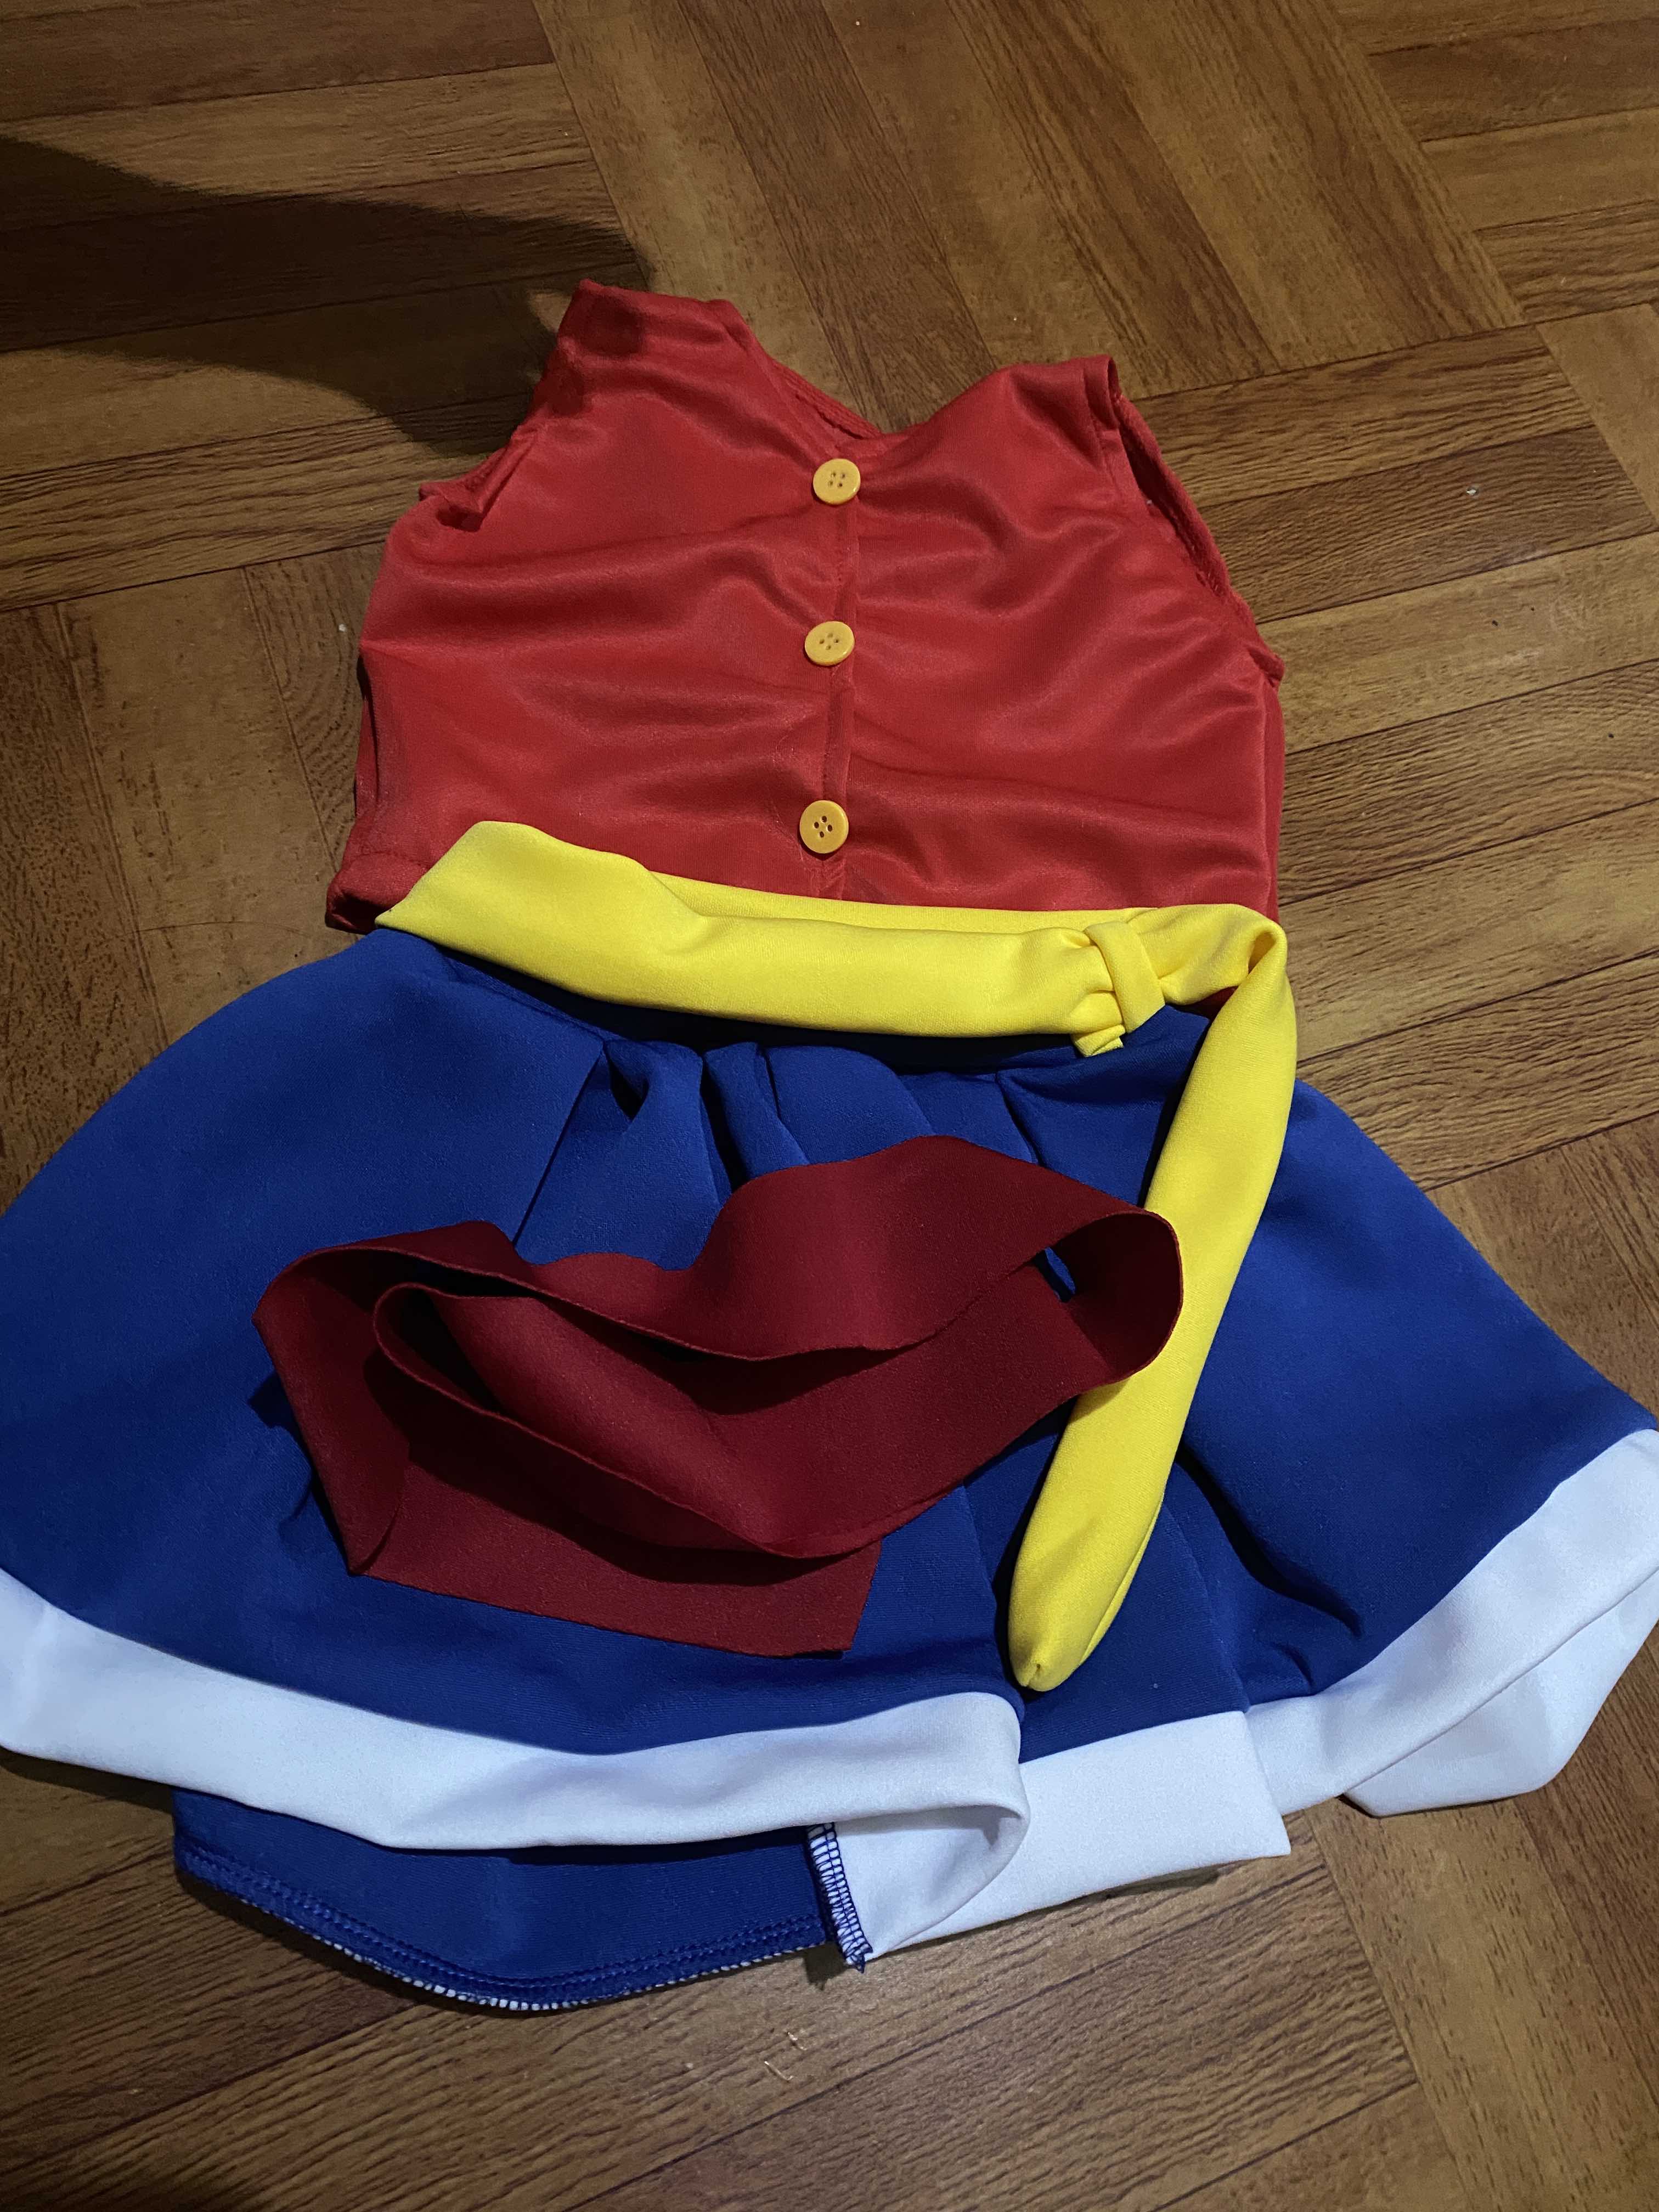 One Piece Girl Version Monkey D Luffy Costume for baby up to 12